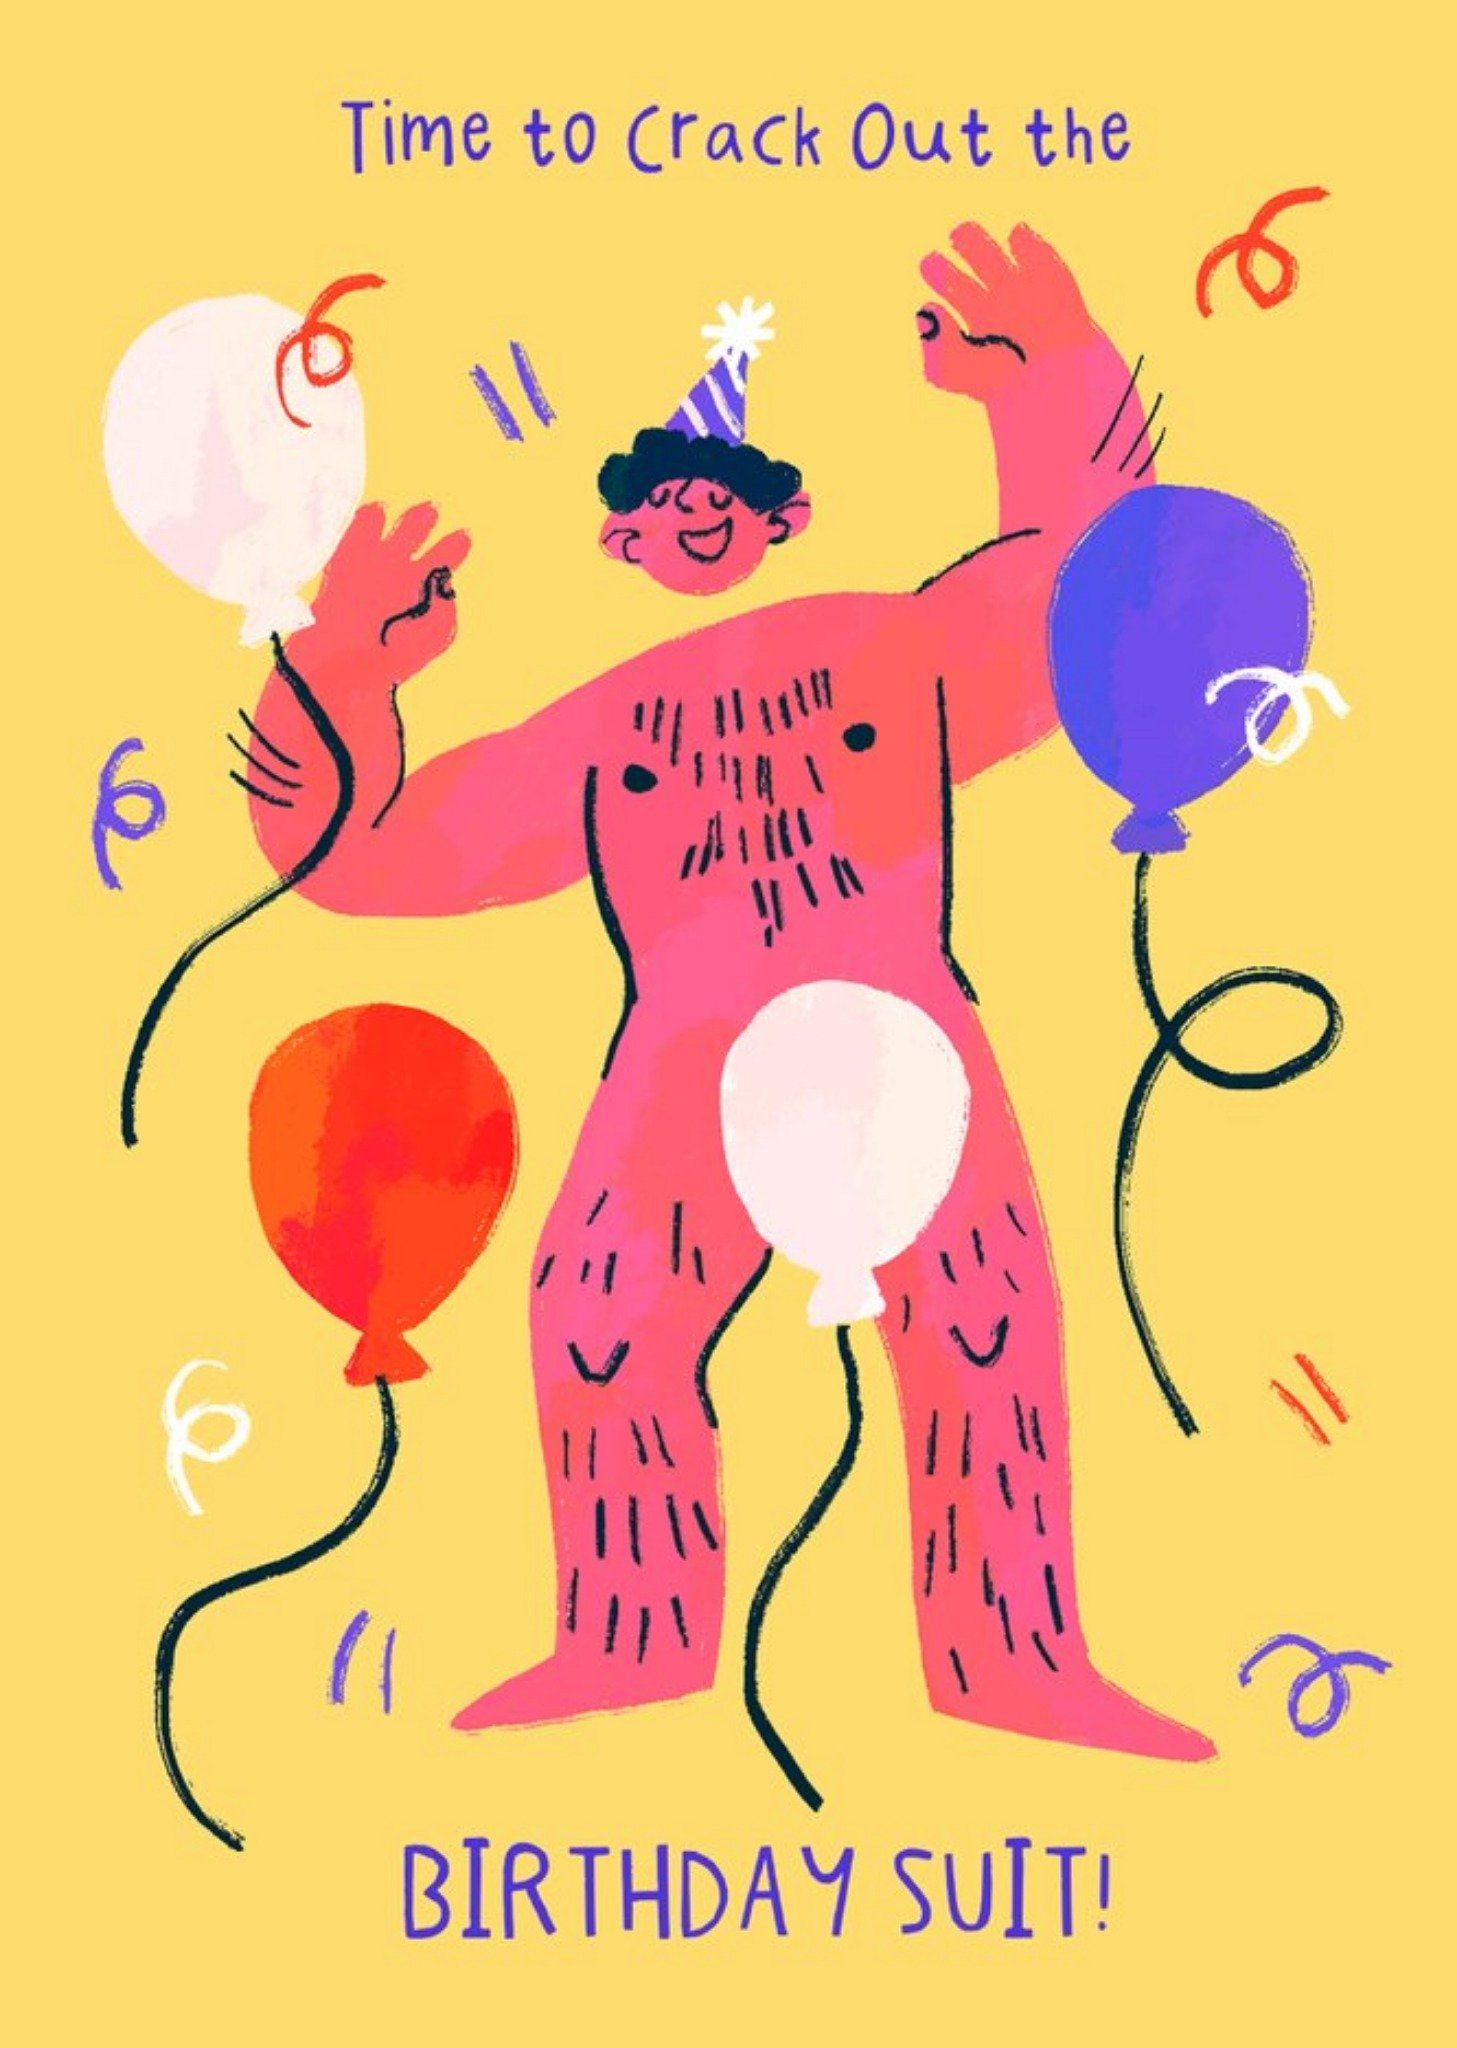 Moonpig Crack Out The Birthday Suit Illustrated Card, Large